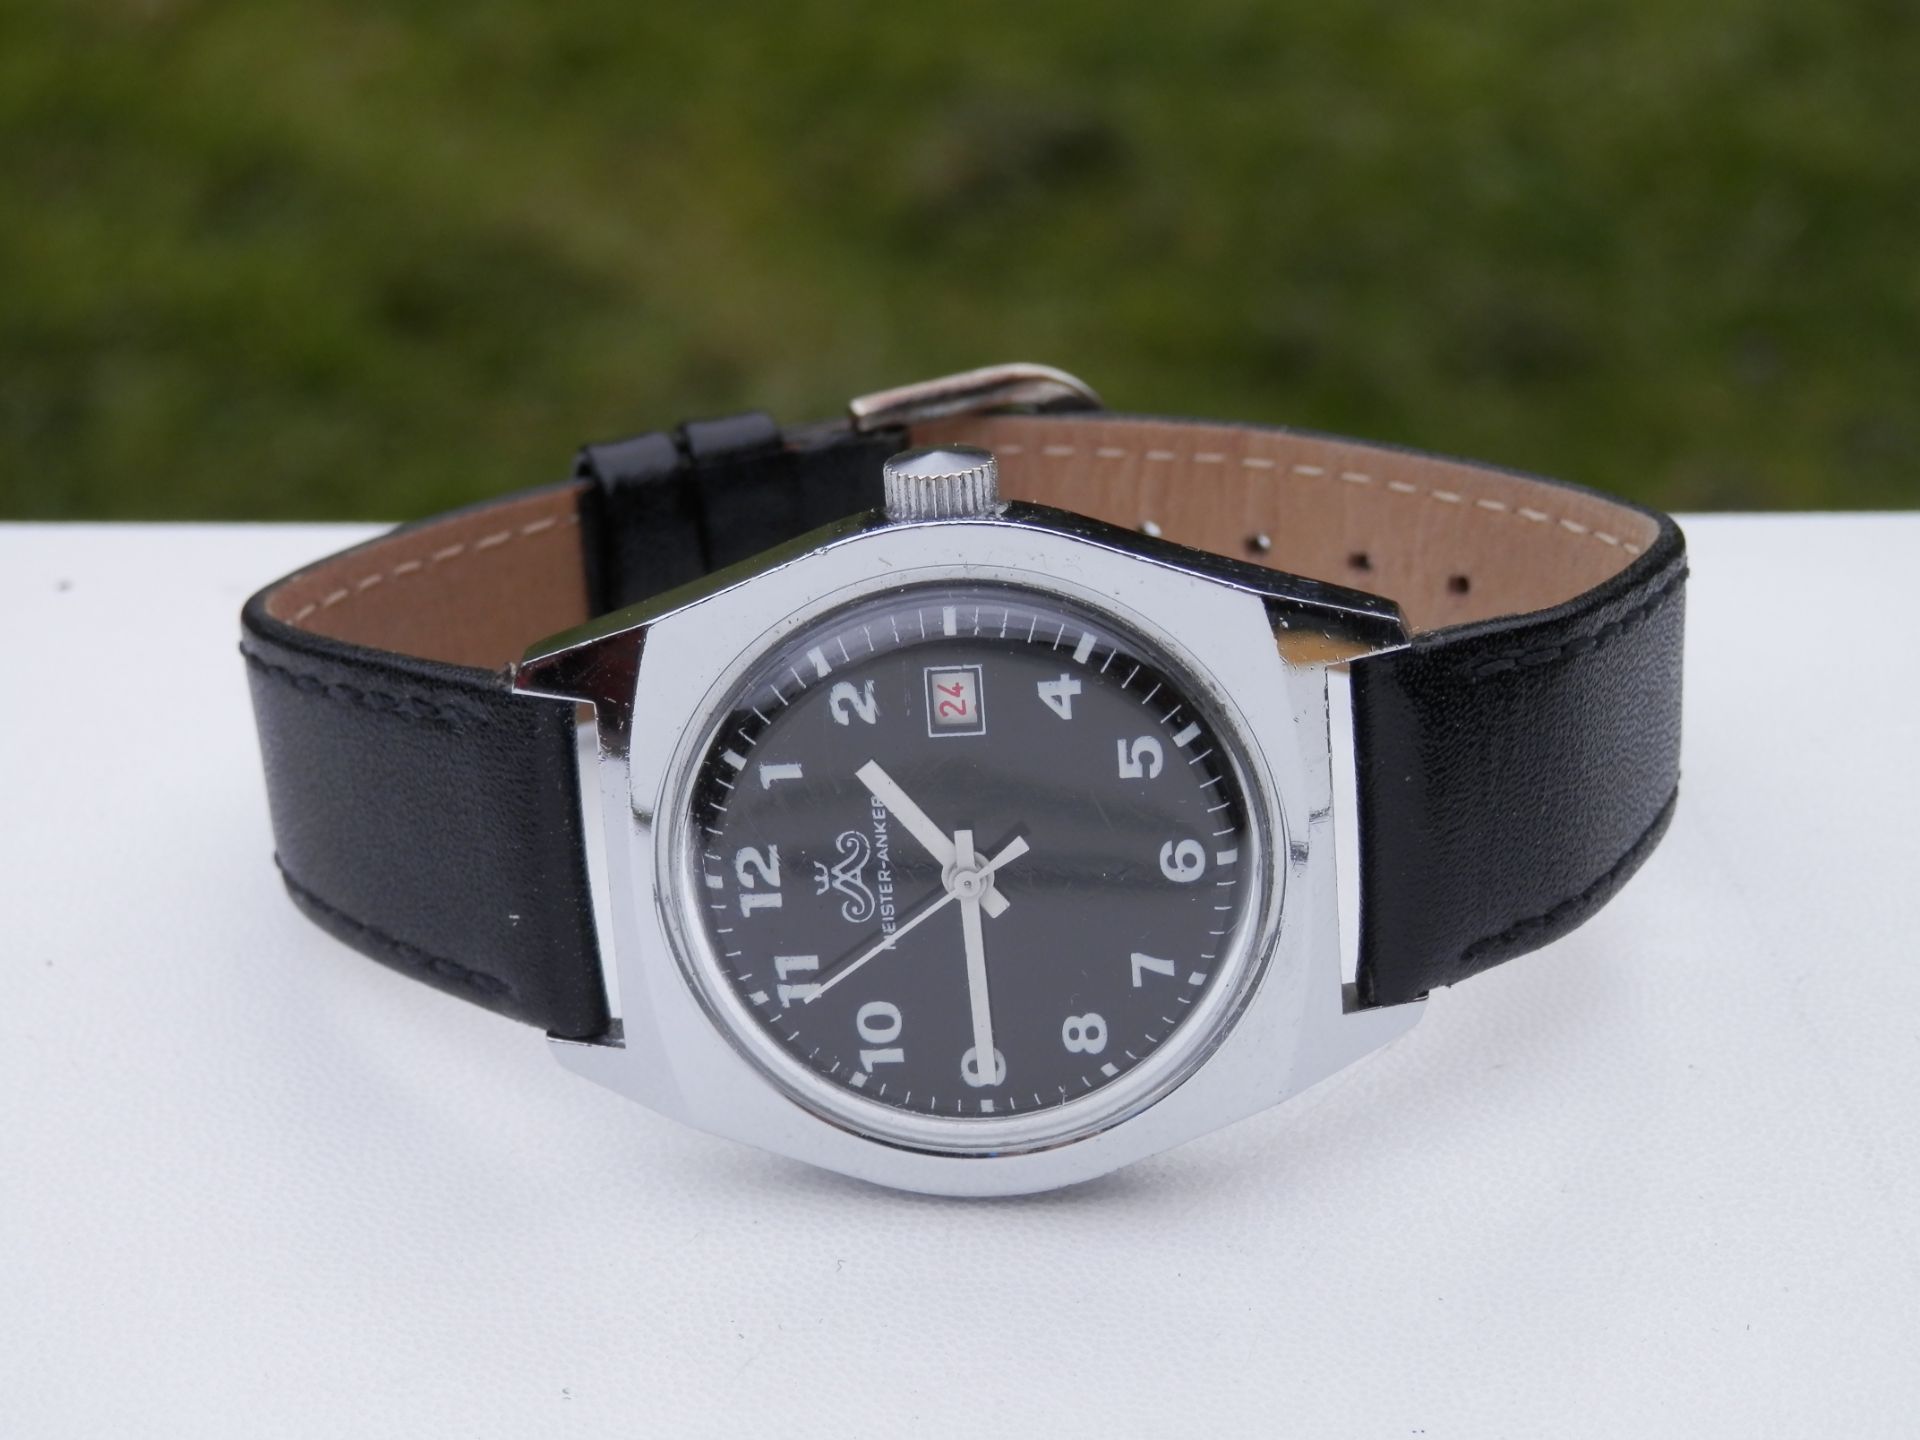 SUPERB RARE GENTS 1960S GERMAN MADE MEISTER ANKER HAND WIND DATE WATCH. - Image 8 of 10